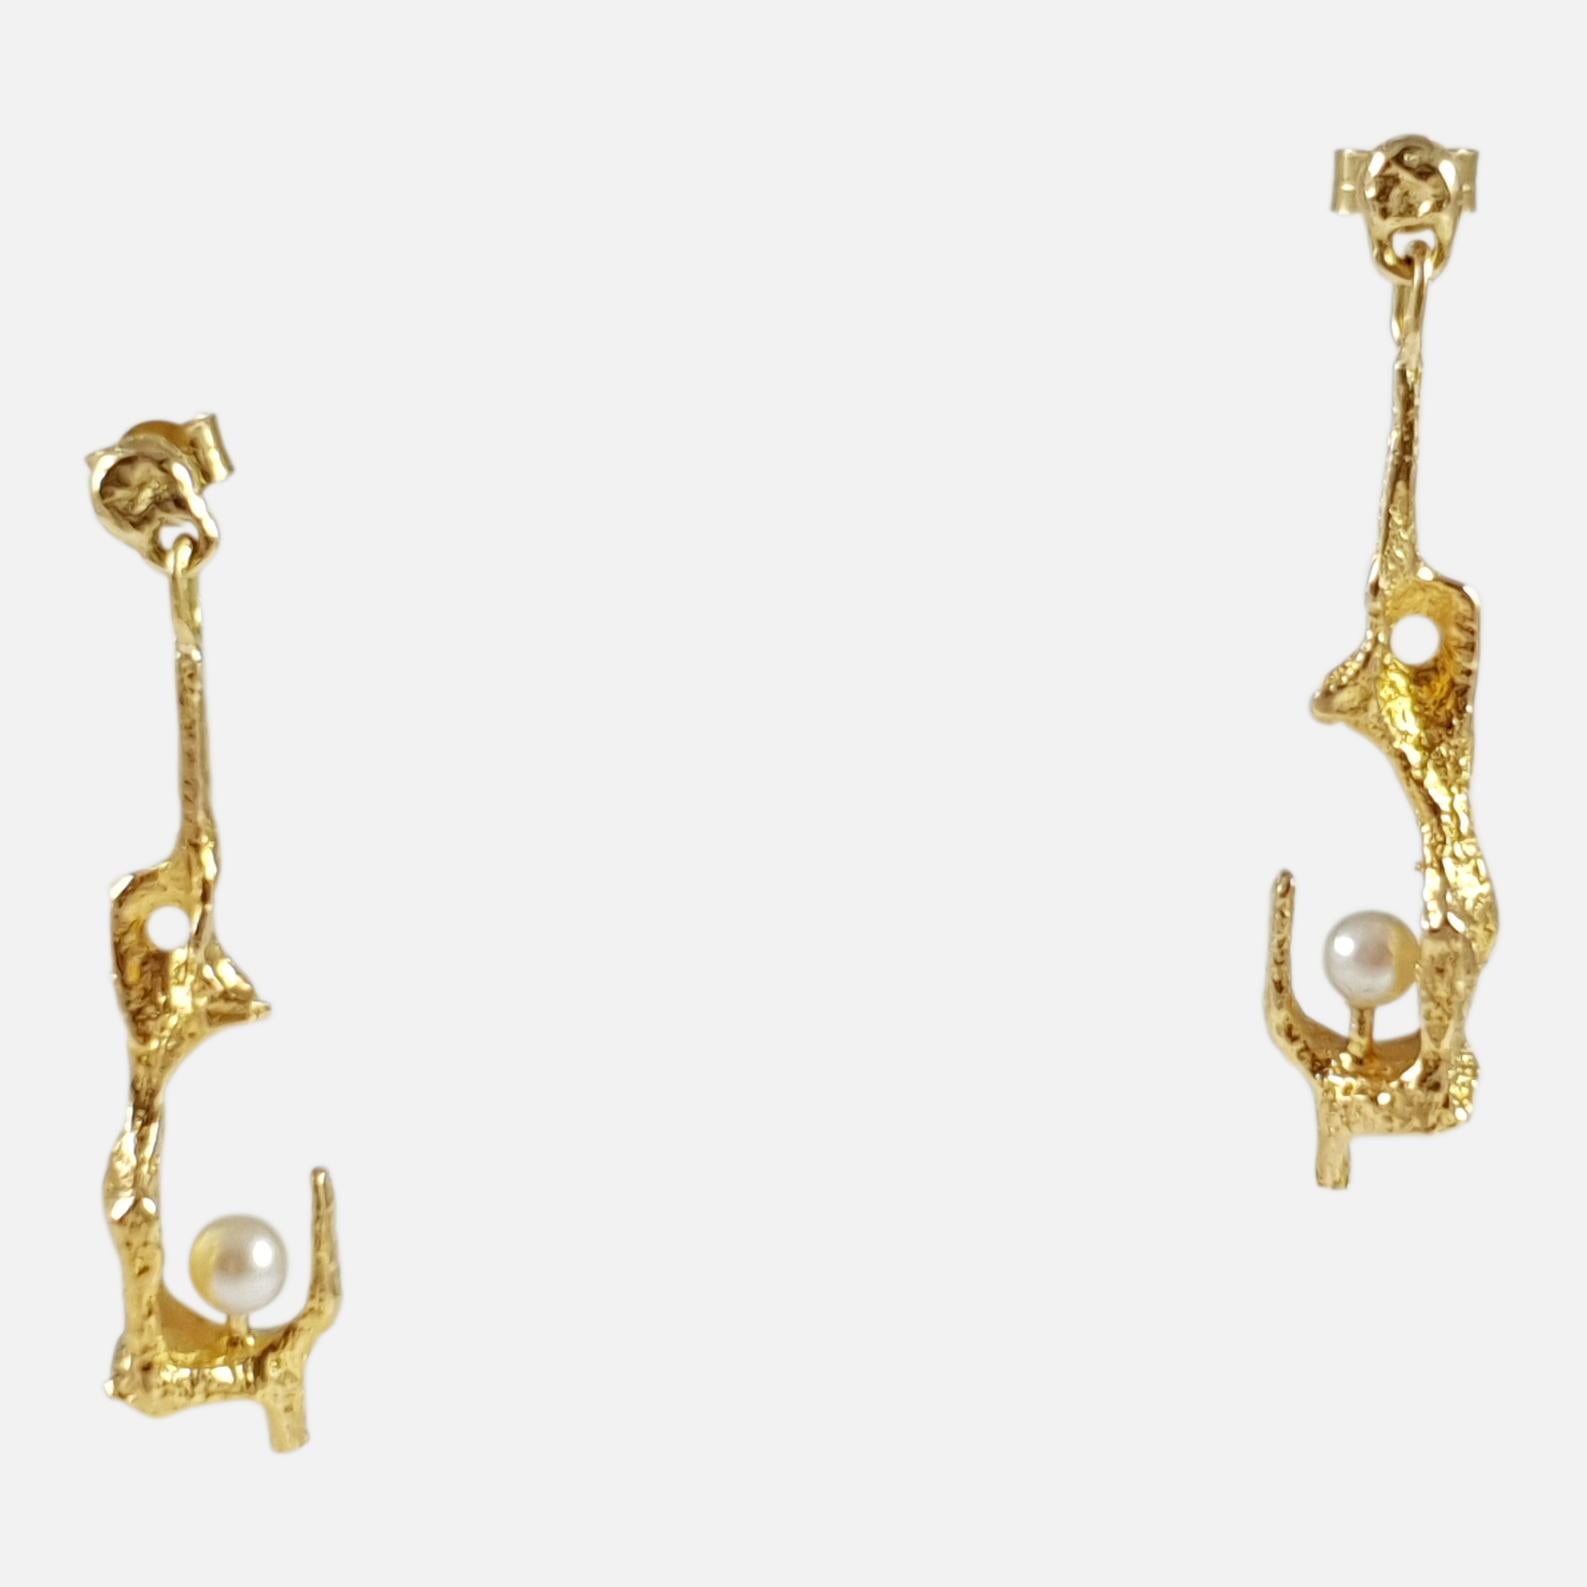 A superb pair of Finnish 18 karat yellow gold cultured pearl earrings designed by Björn Weckström for Lapponia, Finland in the 1960s. The pearls are held in molten finish drops.

The earrings measure 4.3 cm in height x 0.95cm in length.

The